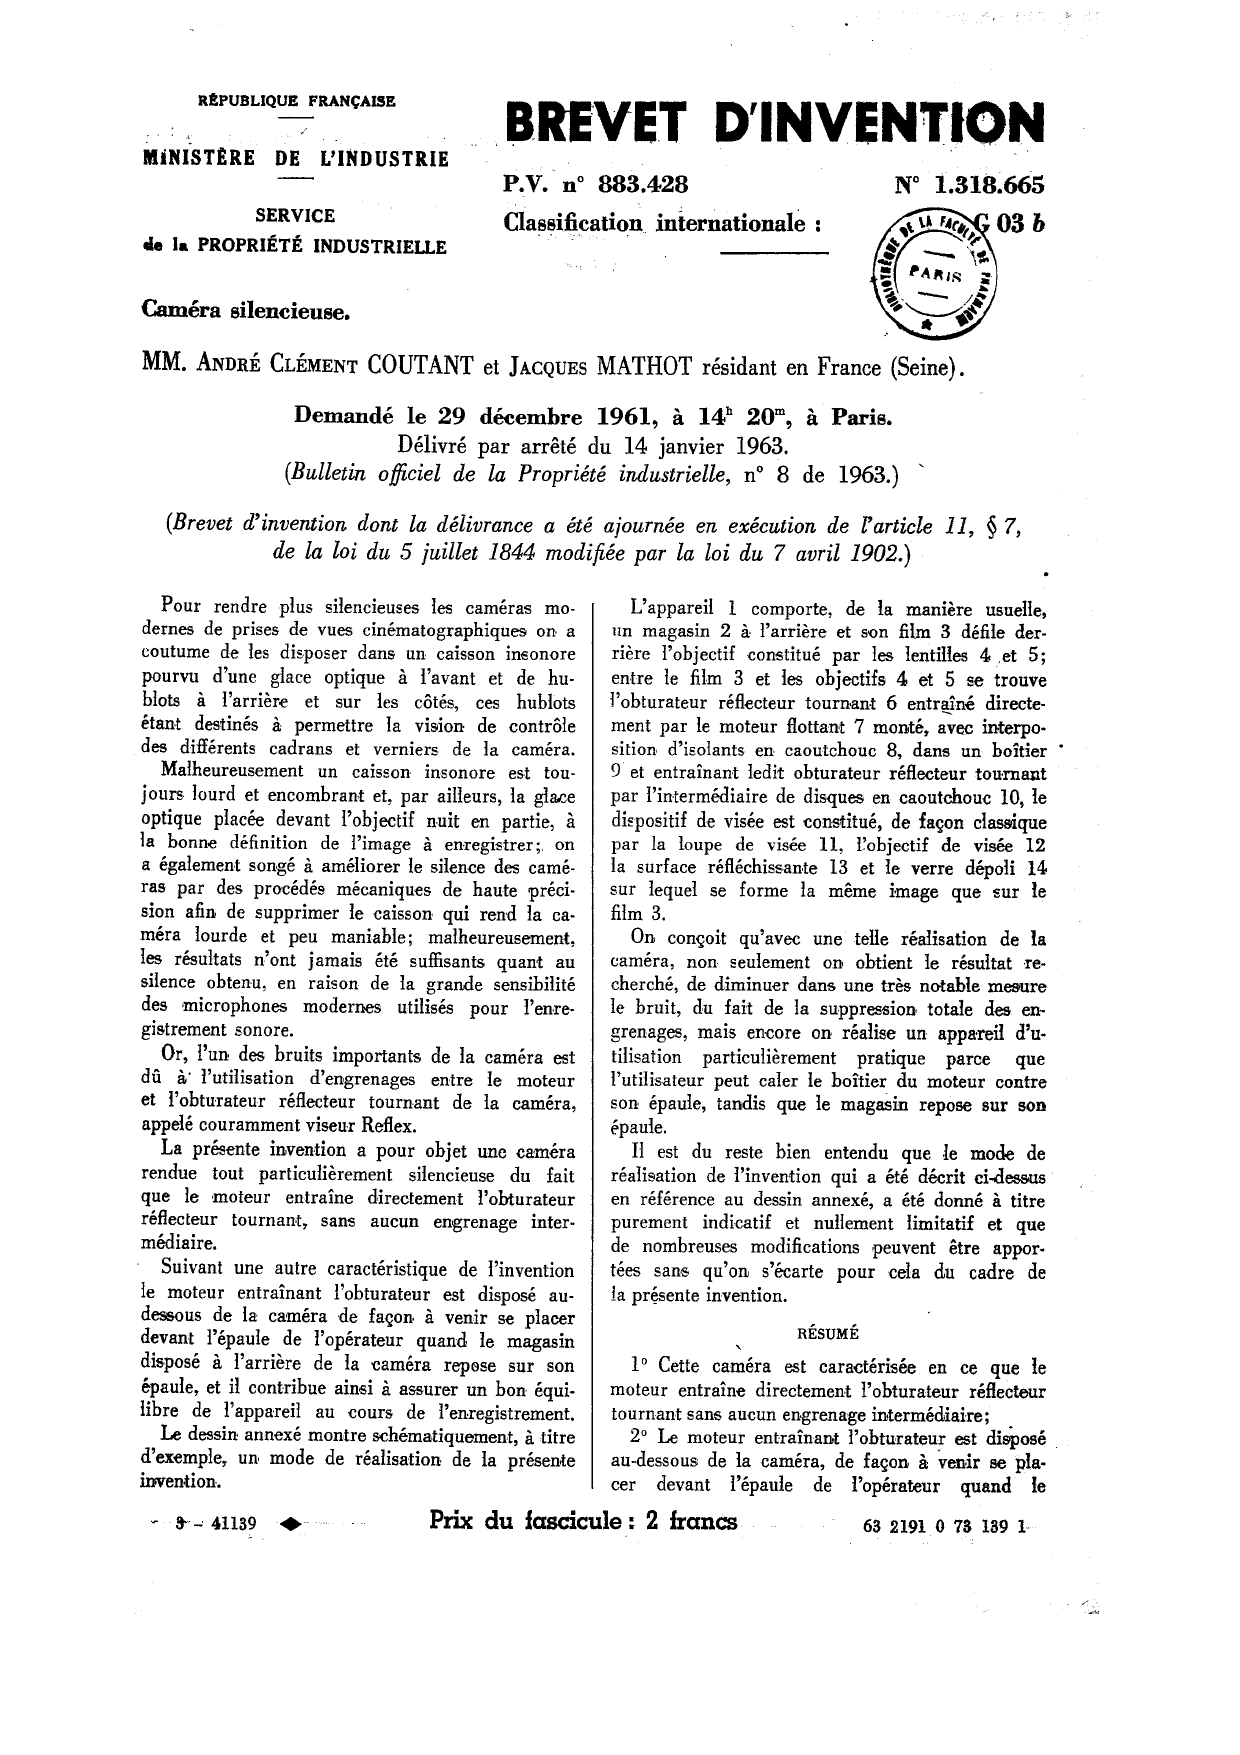 Page one of the patent for Éclair camera, featuring the names of its inventors, André Clément Coutant and Jacques Mathot. Application date and place: December 29, 1961, Paris. The patent number is visible, as is the name of the Department of Industry, which oversaw intellectual property. The rest of the page contains a description of the ‘silent’ camera.